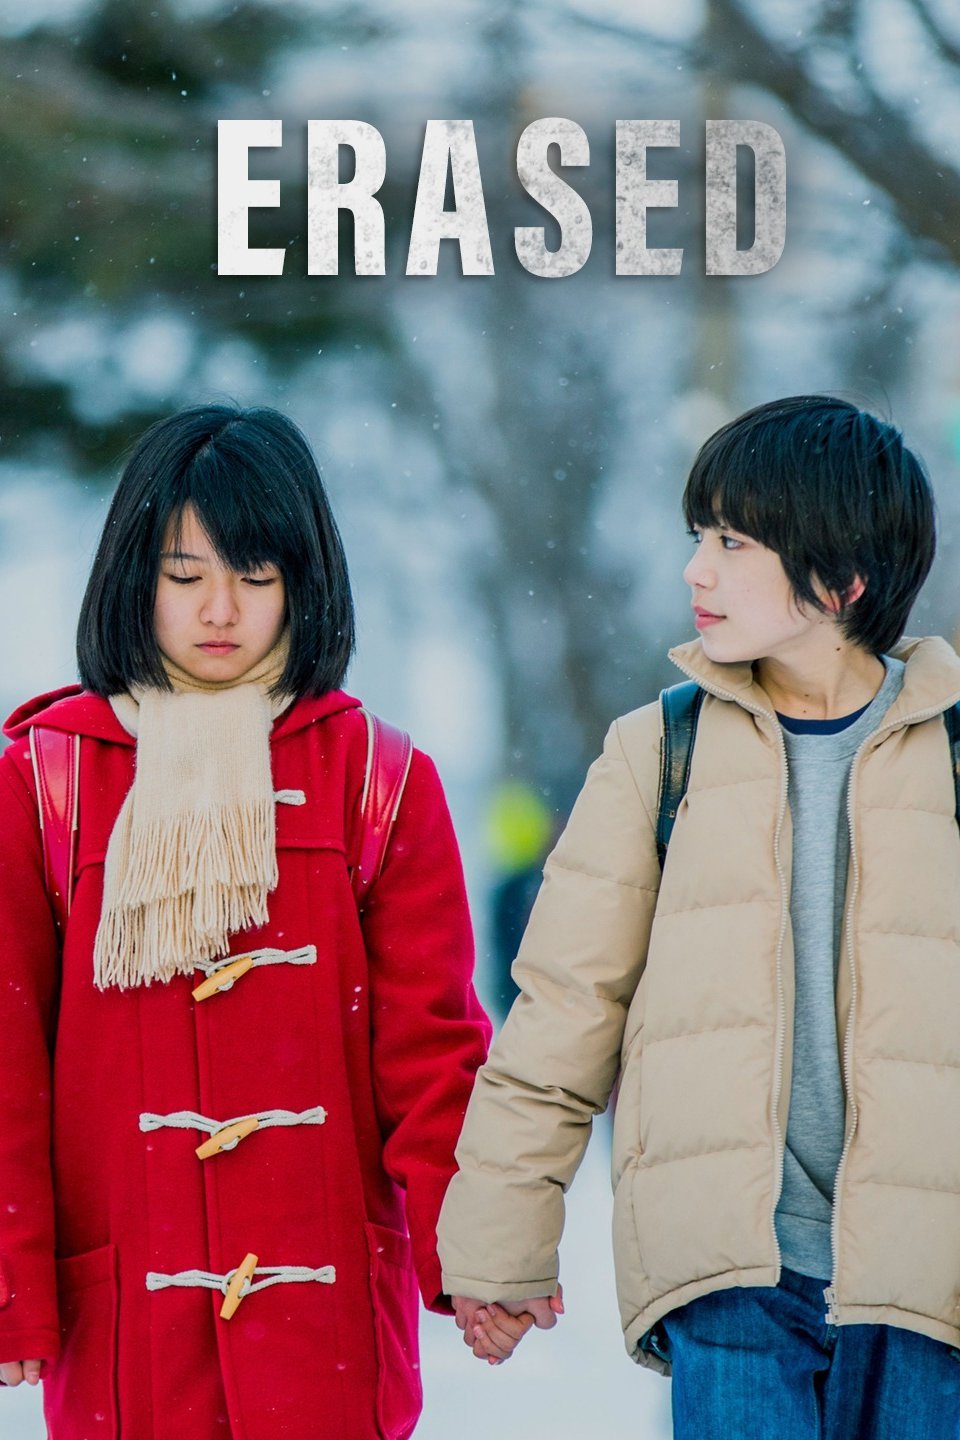 Live-Action Drama of ERASED Announced by Netflix